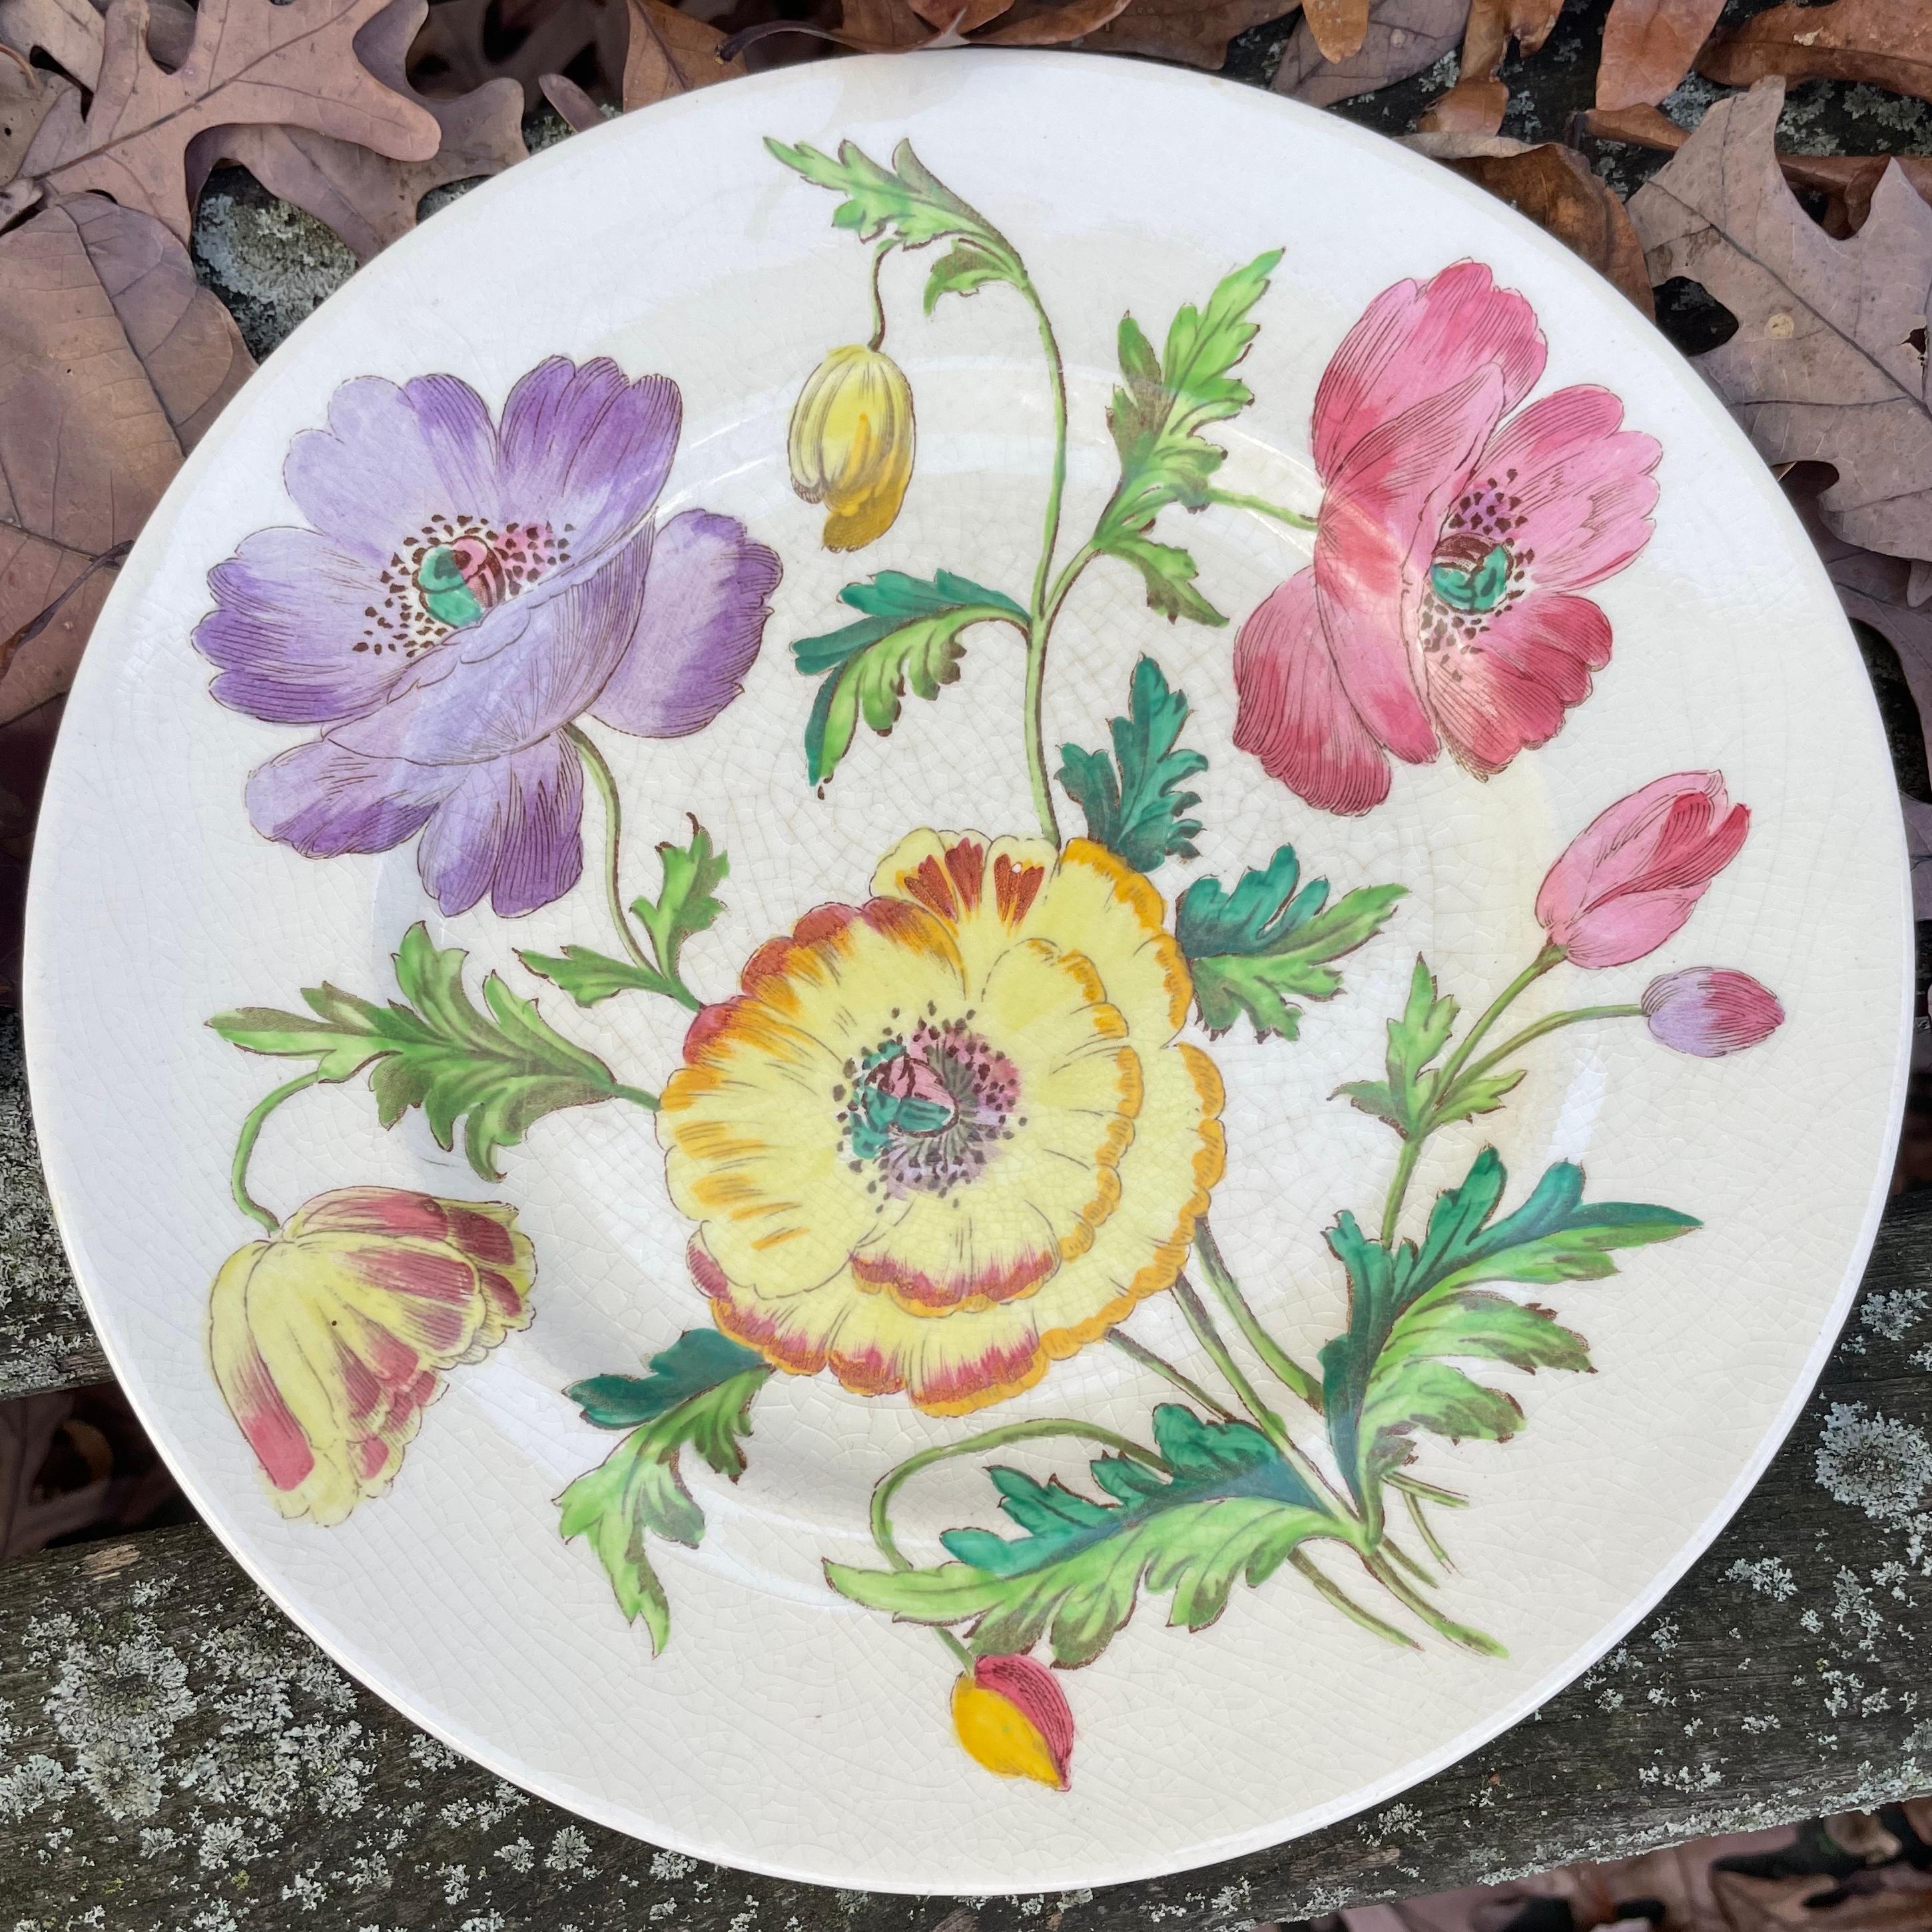 Set of ten English flower plates. Booths China plates each a different English flower with name on reverse. Nasturtium, Iris, Rose, Pyrethrum, Pansies, Daffodils, Poppies, Clematis, Carnation, Aster. England, 1930's.
Dimensions: 9